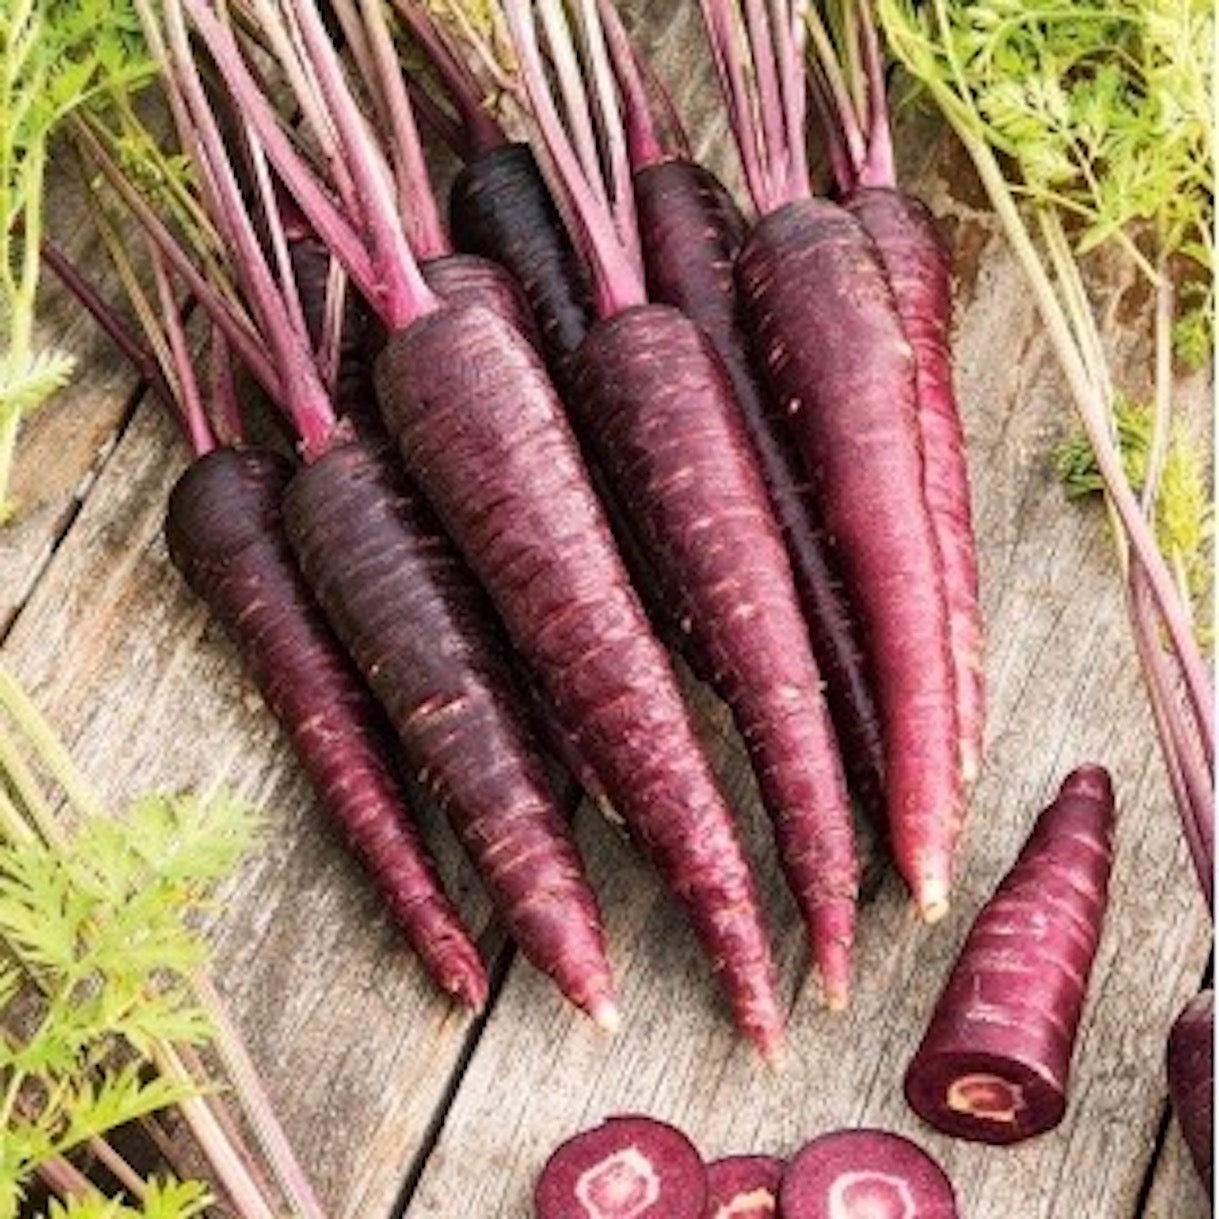 carrot-purple-online-grocery-delivery-supermarket-singapore